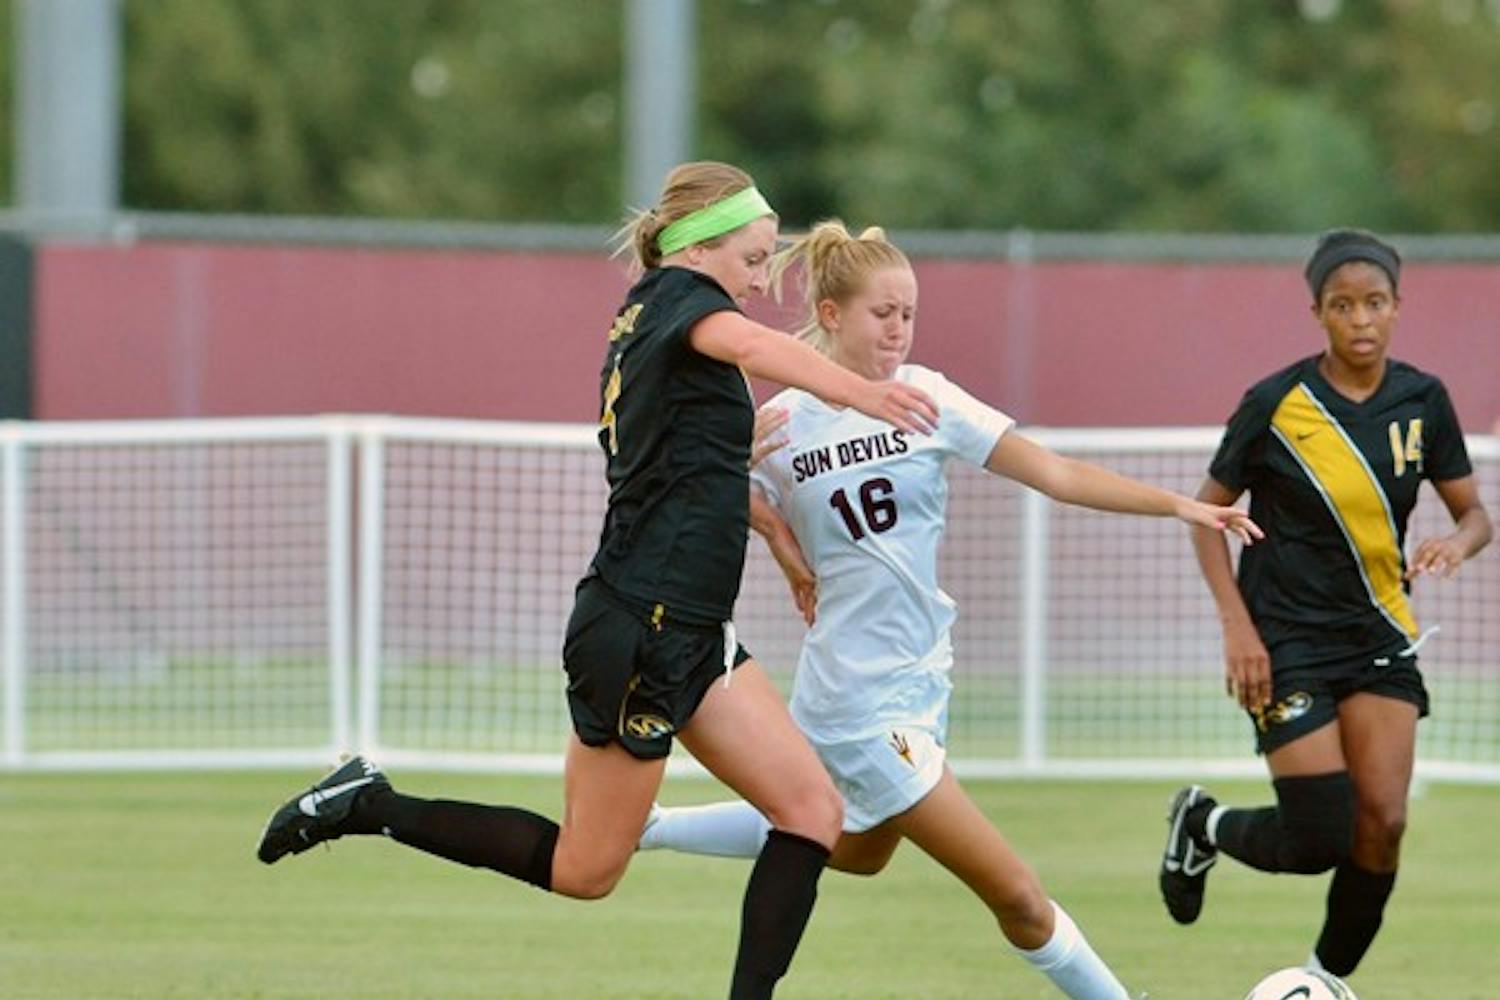 PROTECT THIS HOUSE: Sophomore midfielder Blair Alderson (16) winds up for a kick away from Missouri junior midfielder Haley Krentz during the Sun Devils’ 1-0 loss to the Tigers on Sept. 11. ASU returns to Sun Devil Soccer Stadium on Friday for the first time in 26 days for a homestand against No. 19 Oregon State and Oregon. (Photo by Aaron Lavinsky)